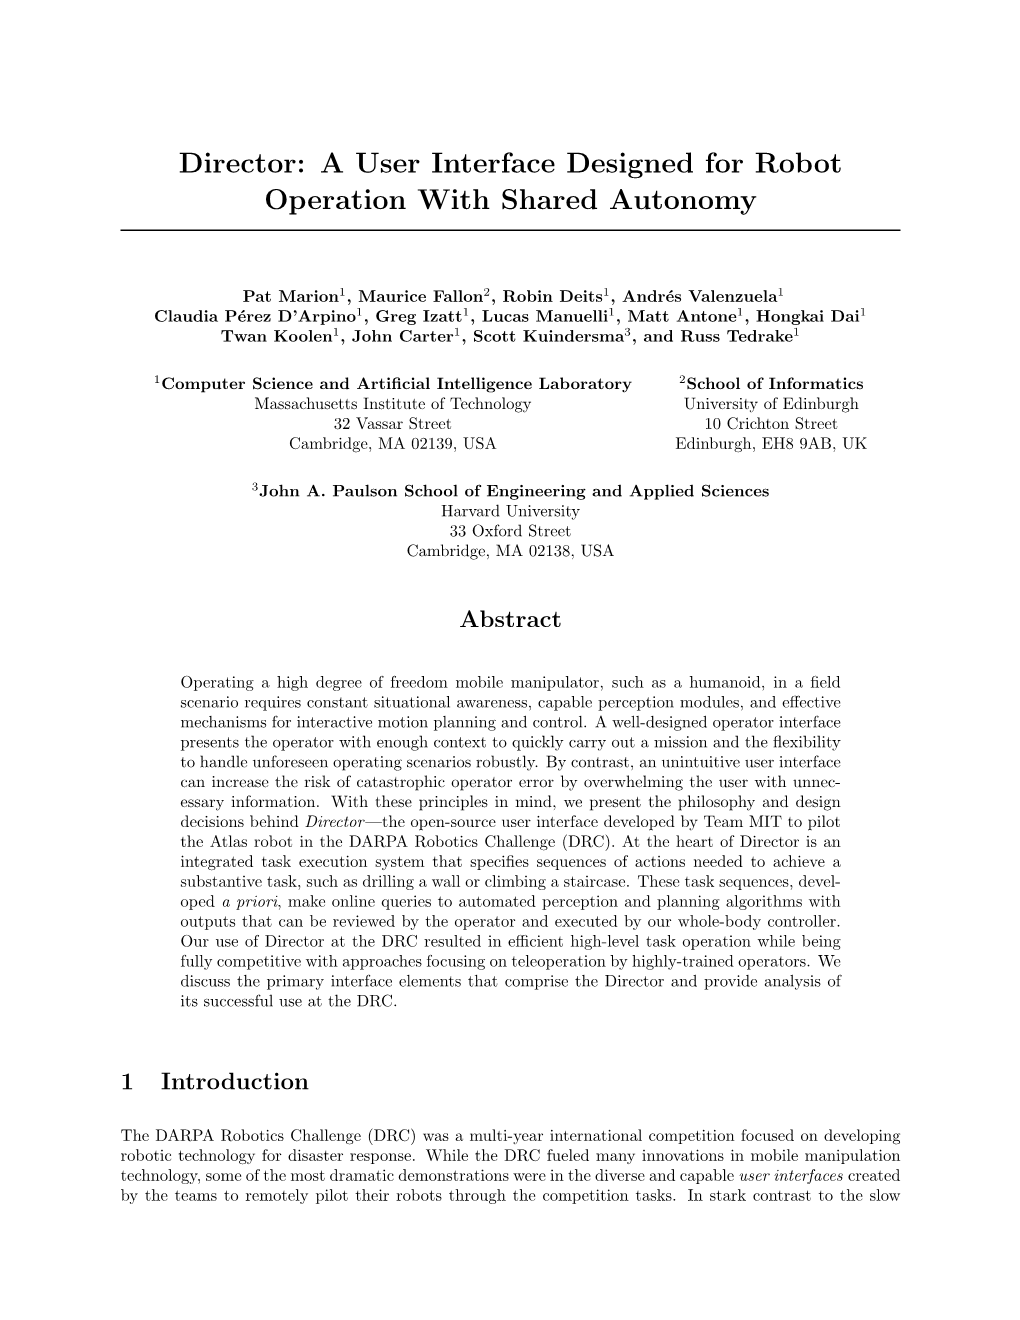 A User Interface Designed for Robot Operation with Shared Autonomy